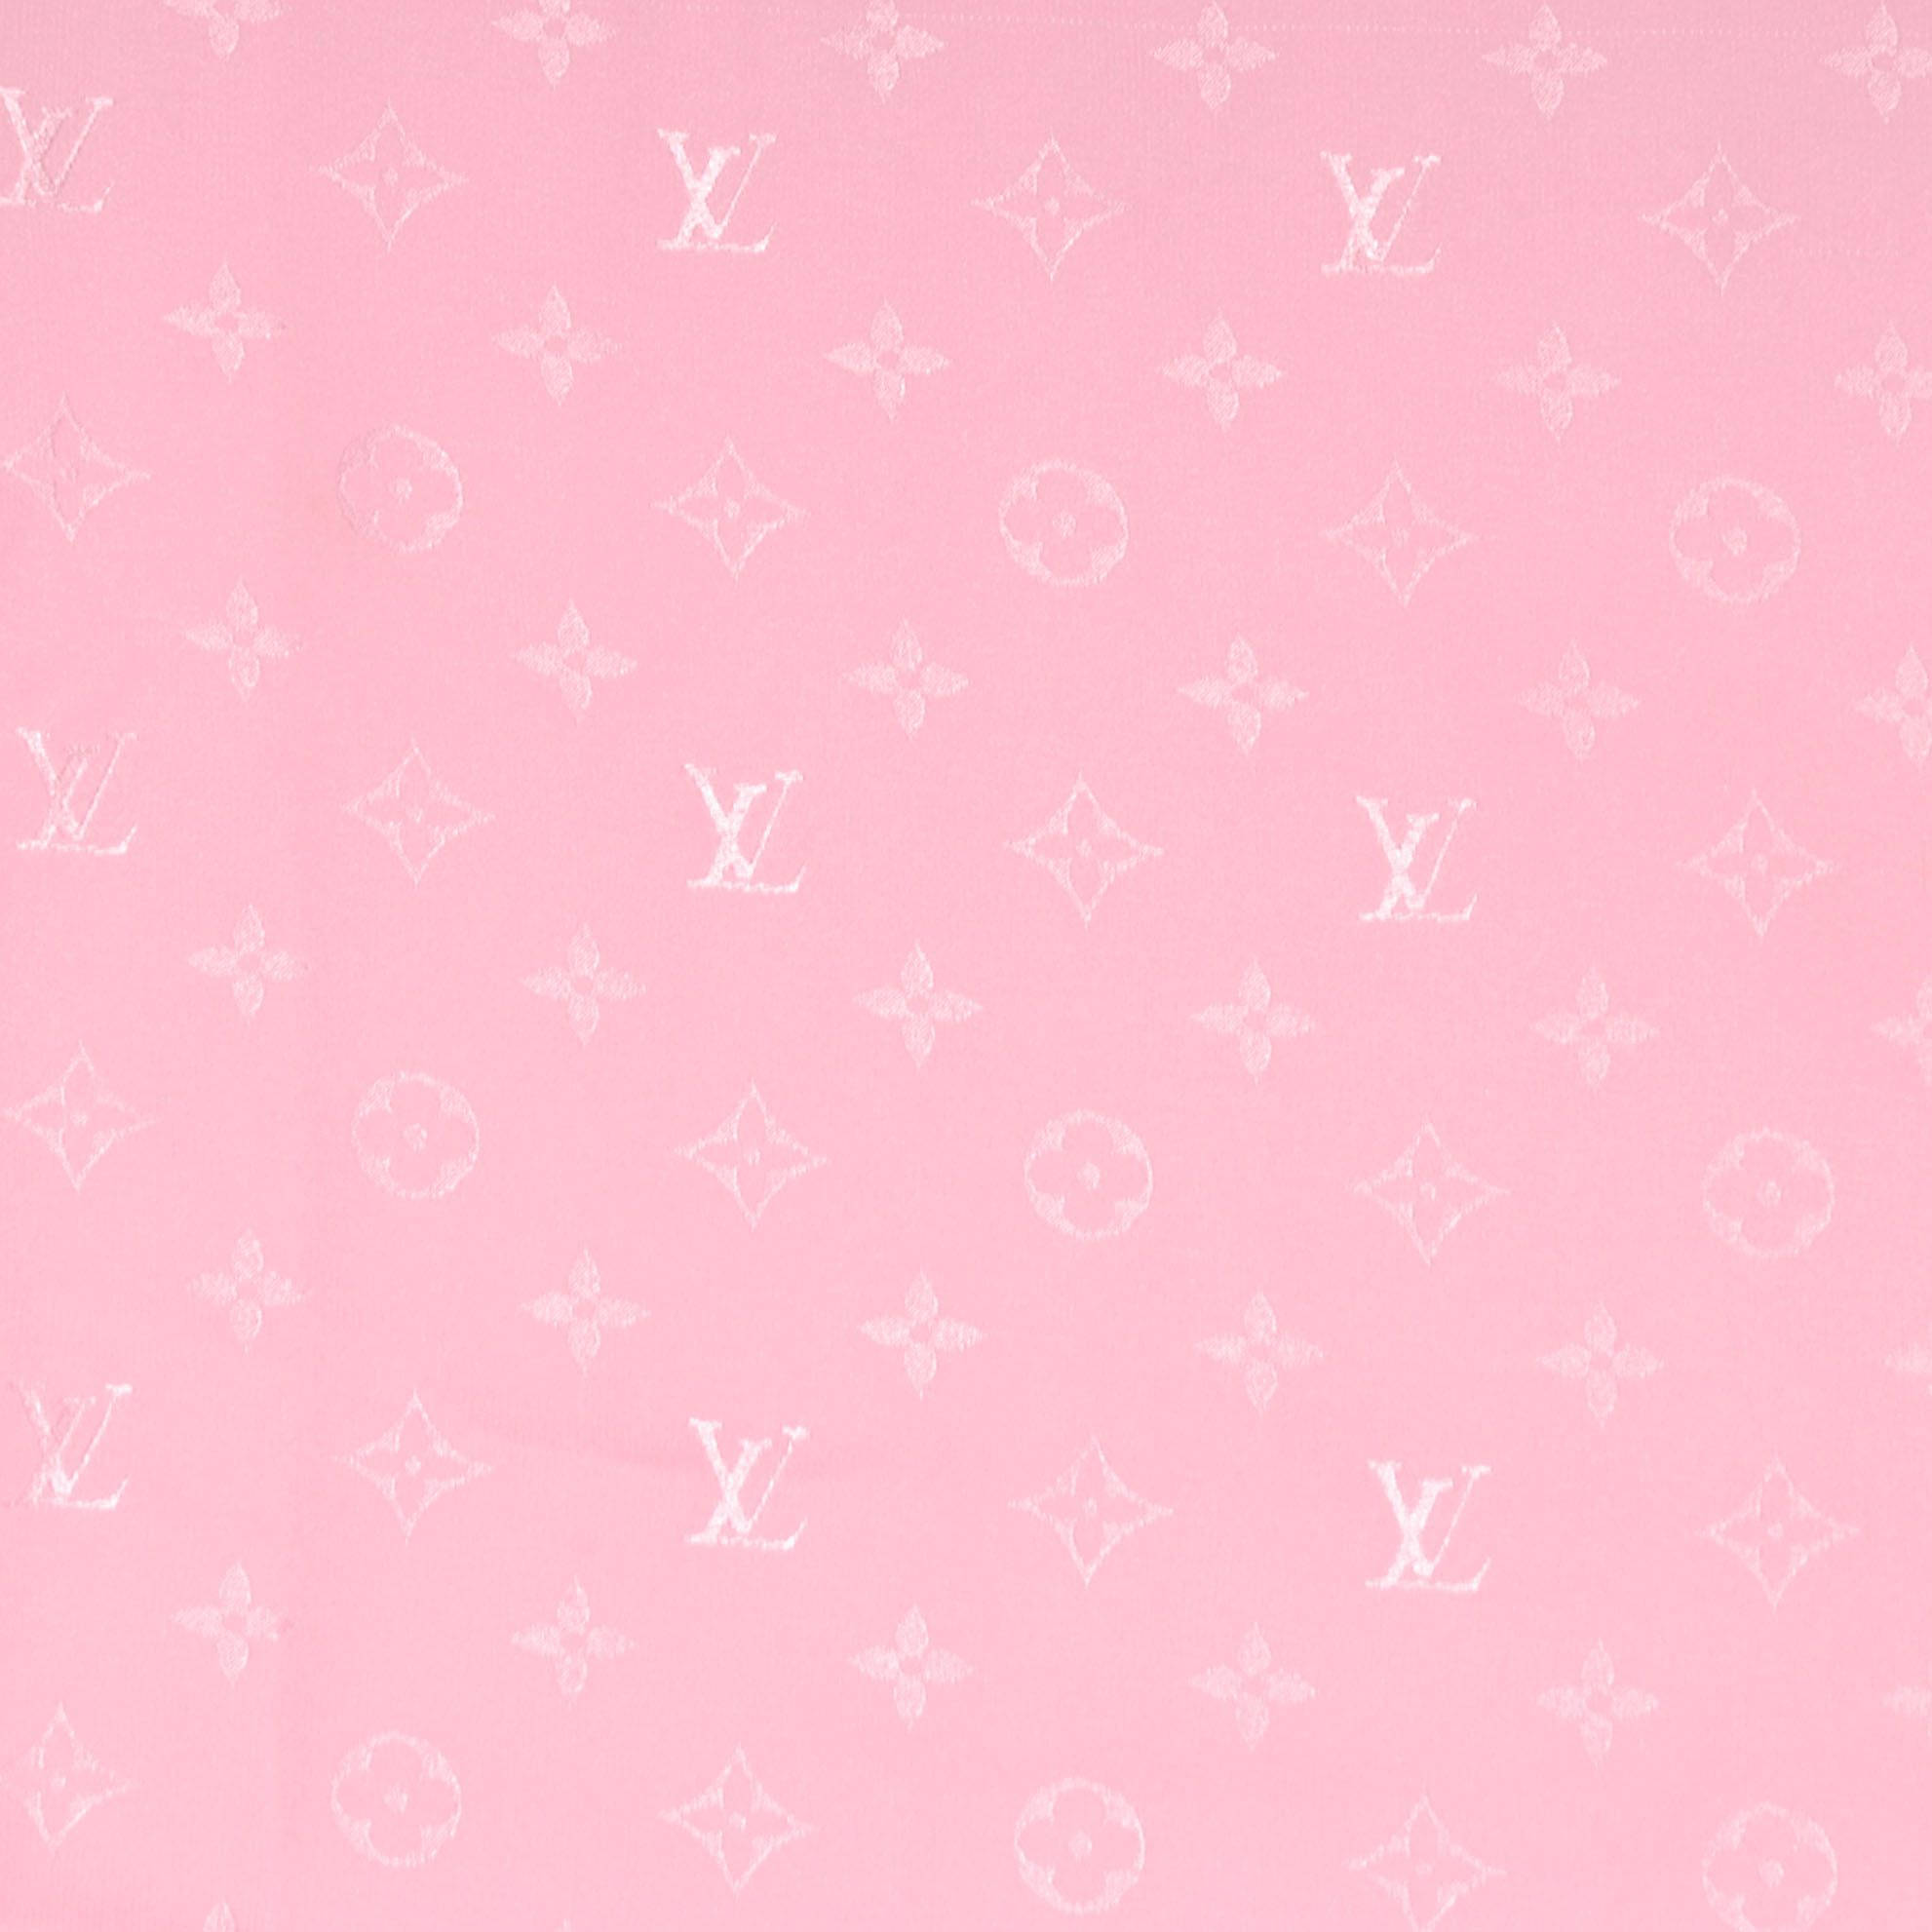 Click để xem chi tiết và trải nghiệm không gian thời trang mới lạ này. (If you love Y2K style, check out this unique Louis Vuitton wallpaper. This wallpaper takes you back to the fashion peak of the 2000s. Click to see details and experience this new fashion space.)